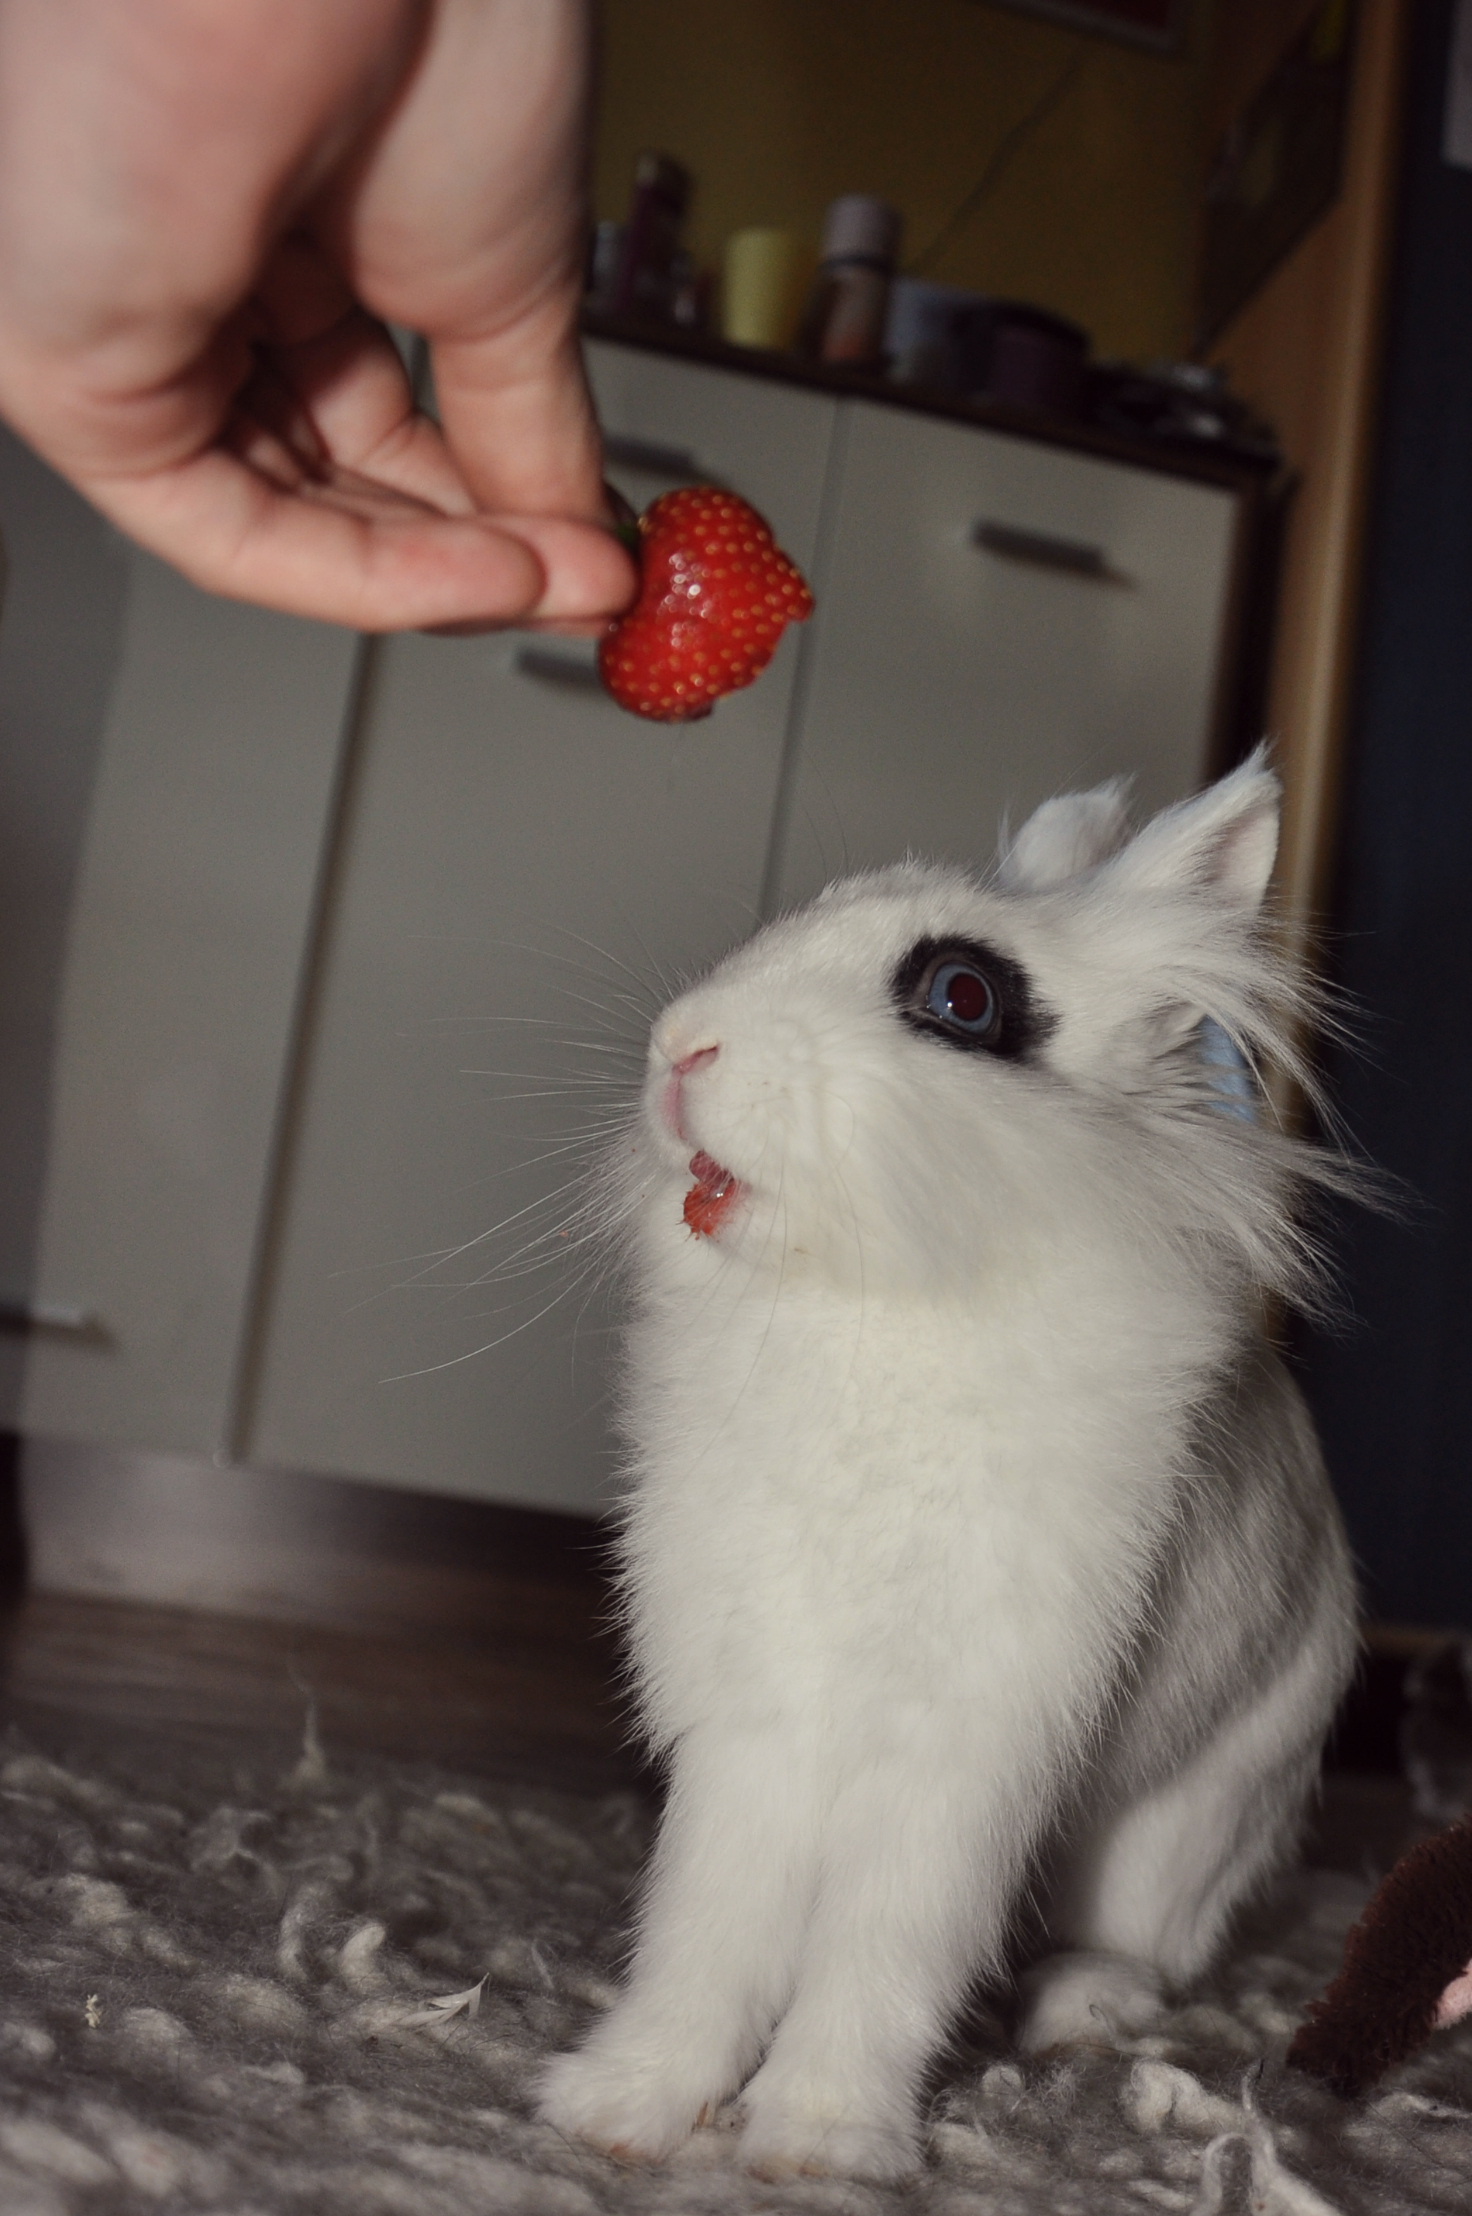 Bunny Will Happily Accept His Human's Offerings of Greens and Strawberries 2